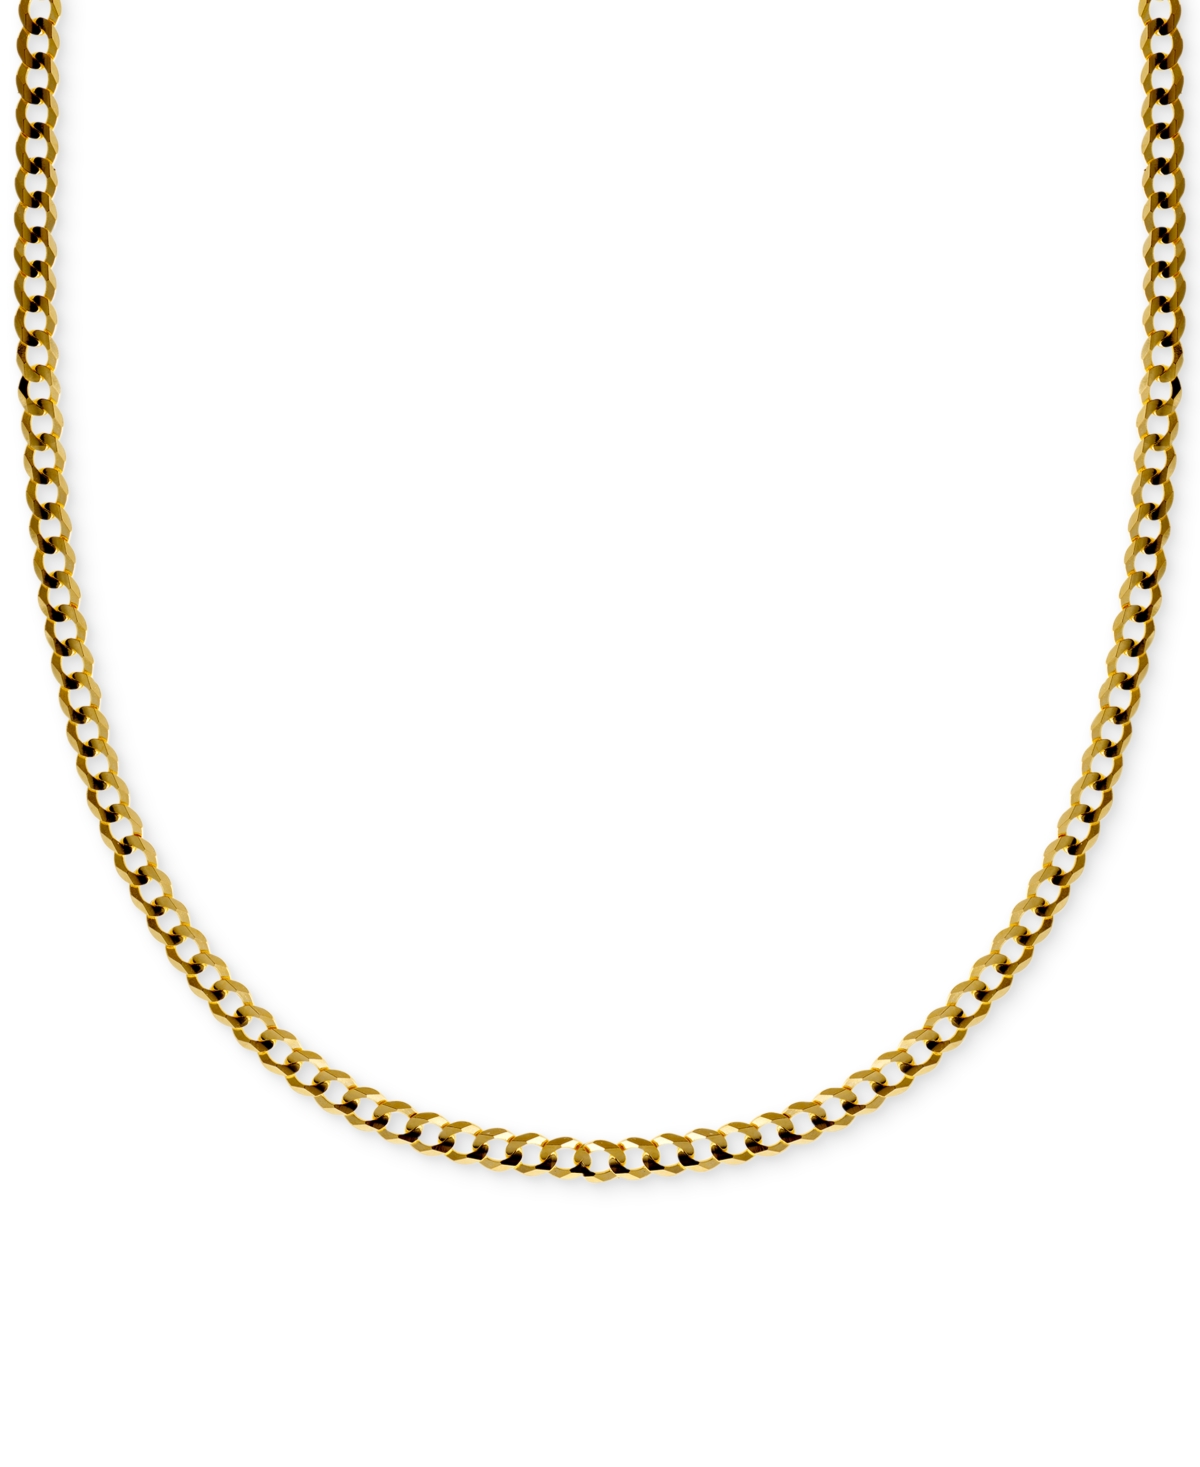 Italian Gold 26" Curb Link Chain Necklace In Solid 14k Gold